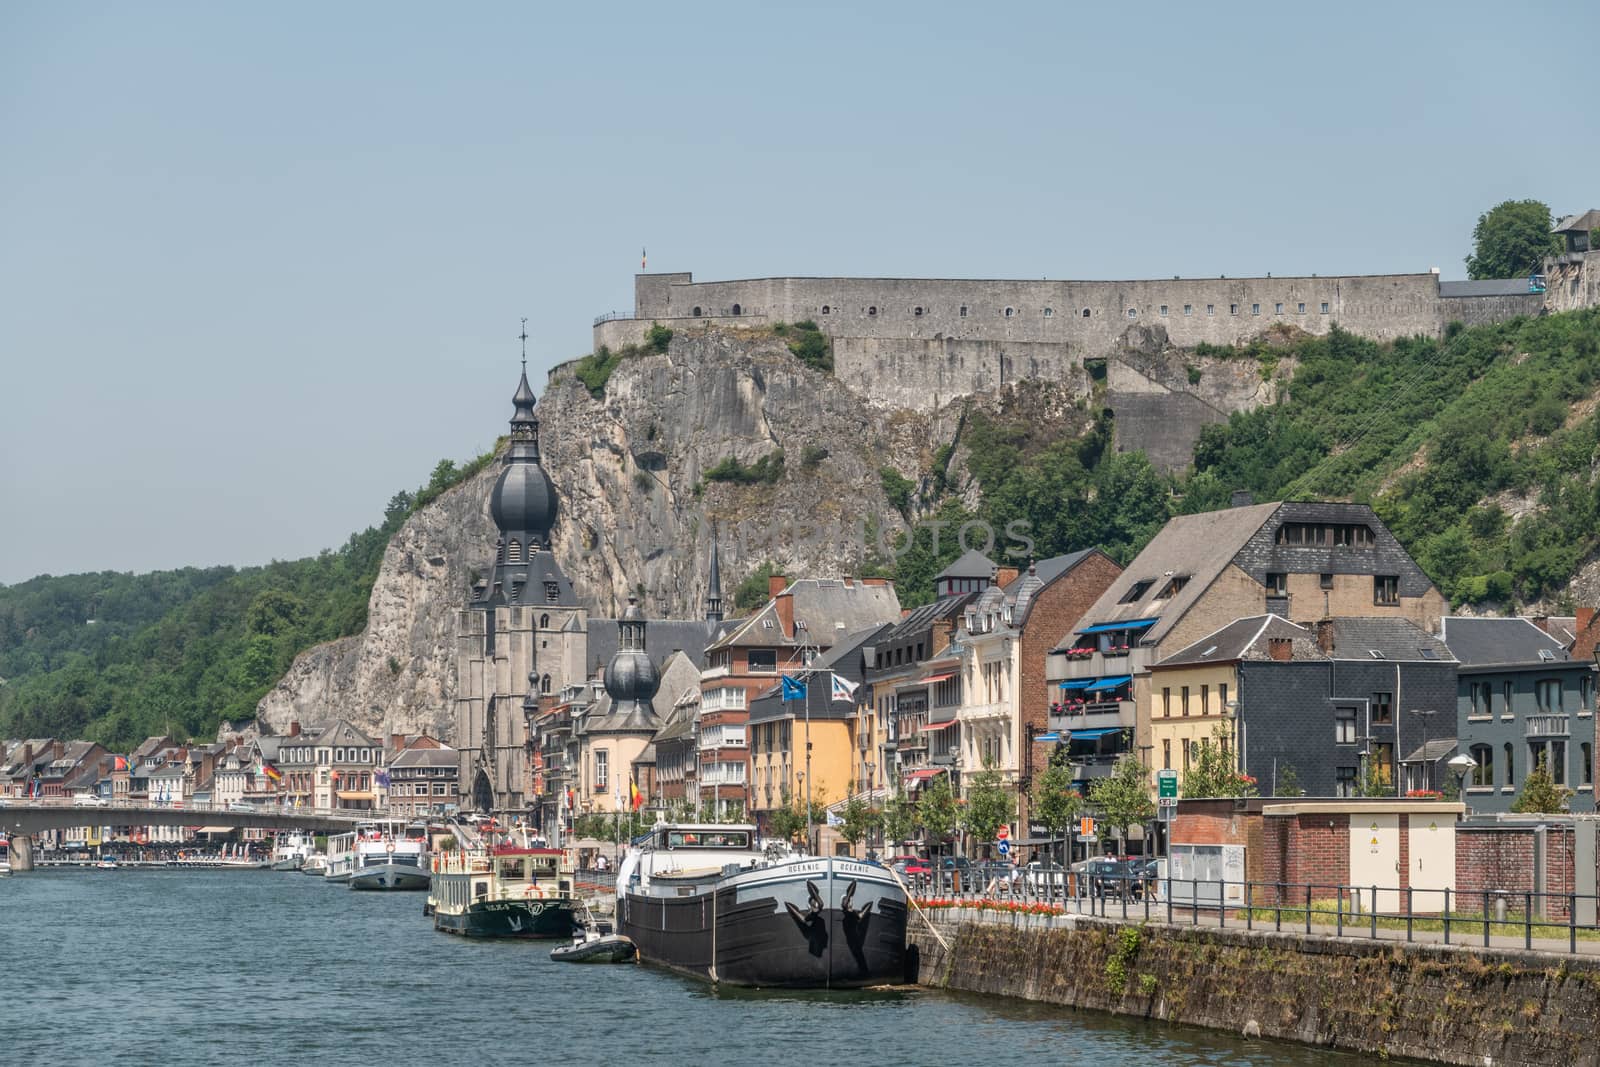 Dinant, Belgium - June 26, 2019: Citadelle fortification seen from right south bank of Meuse River with church and buildings, cars, boats under blue sky.